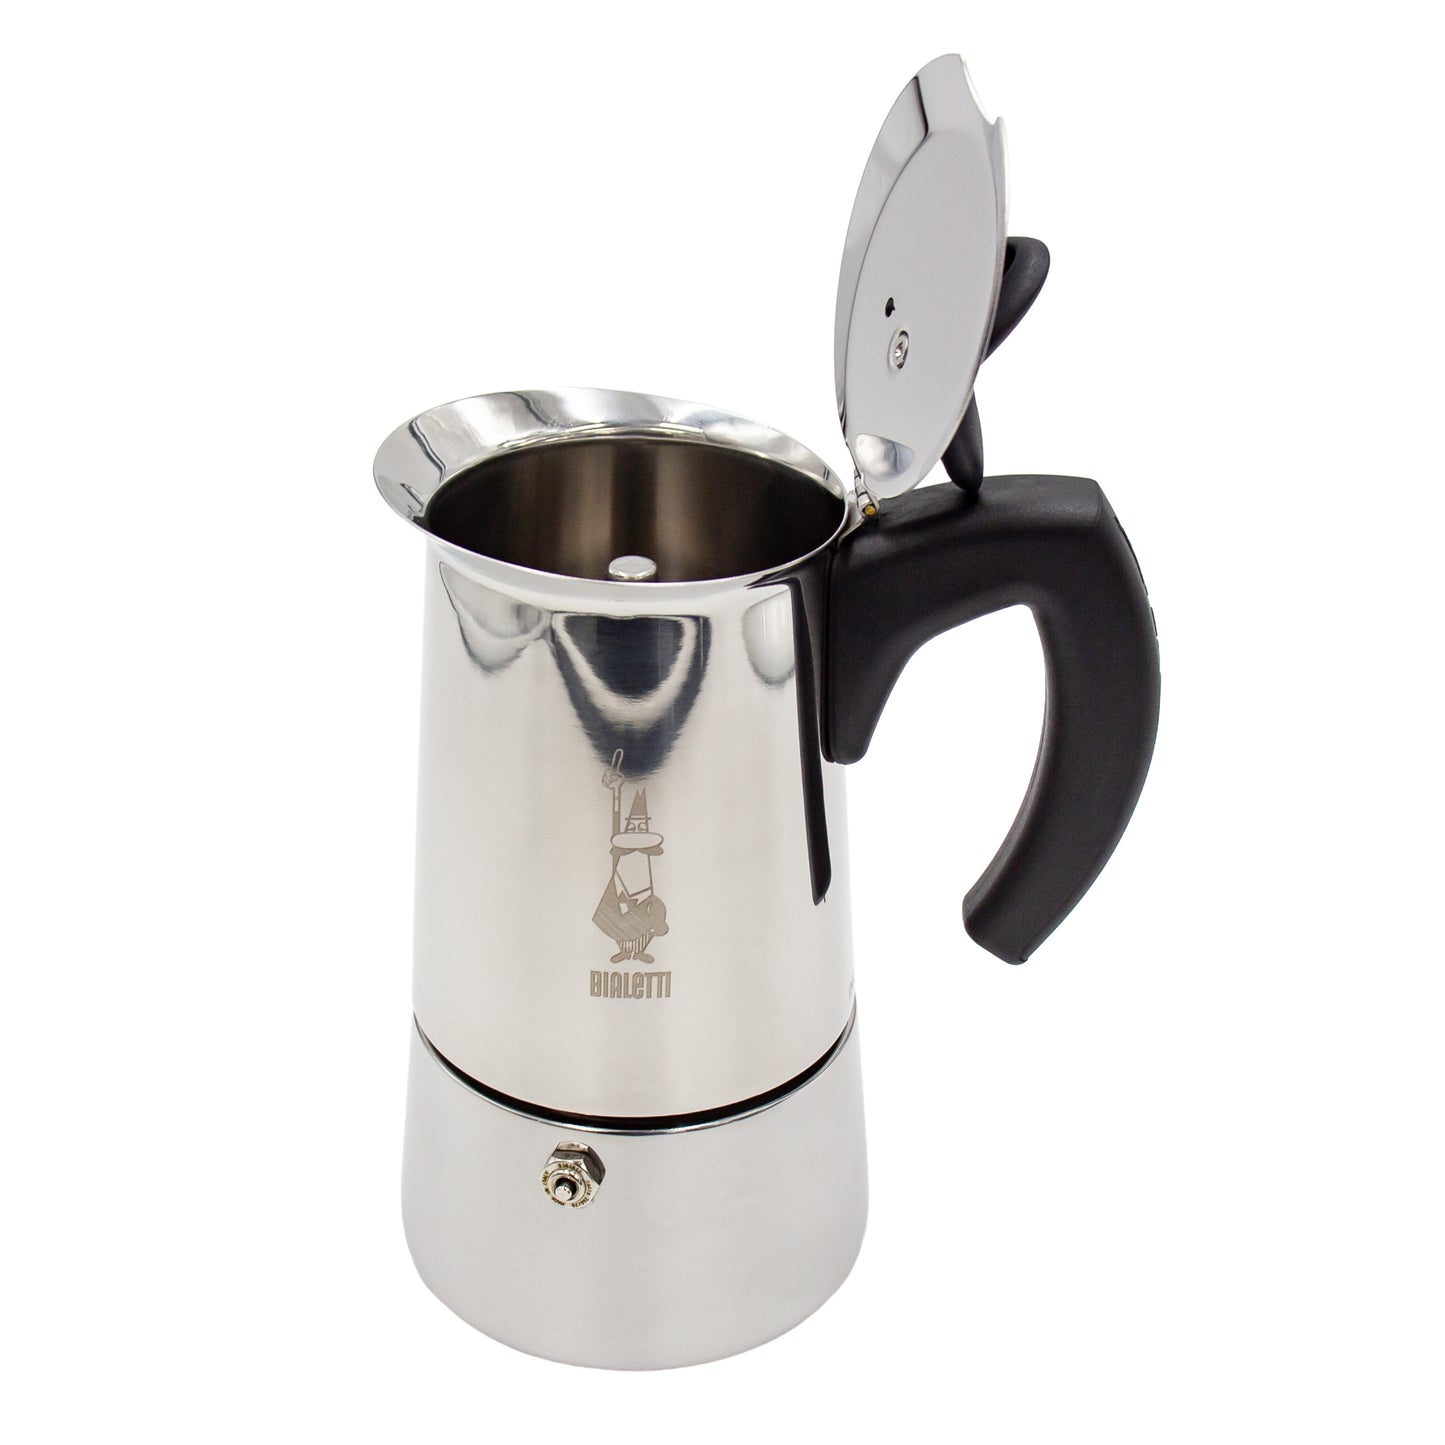 Italian made stainless steel bialetti musa 4 cup espresso coffee maker with lid open